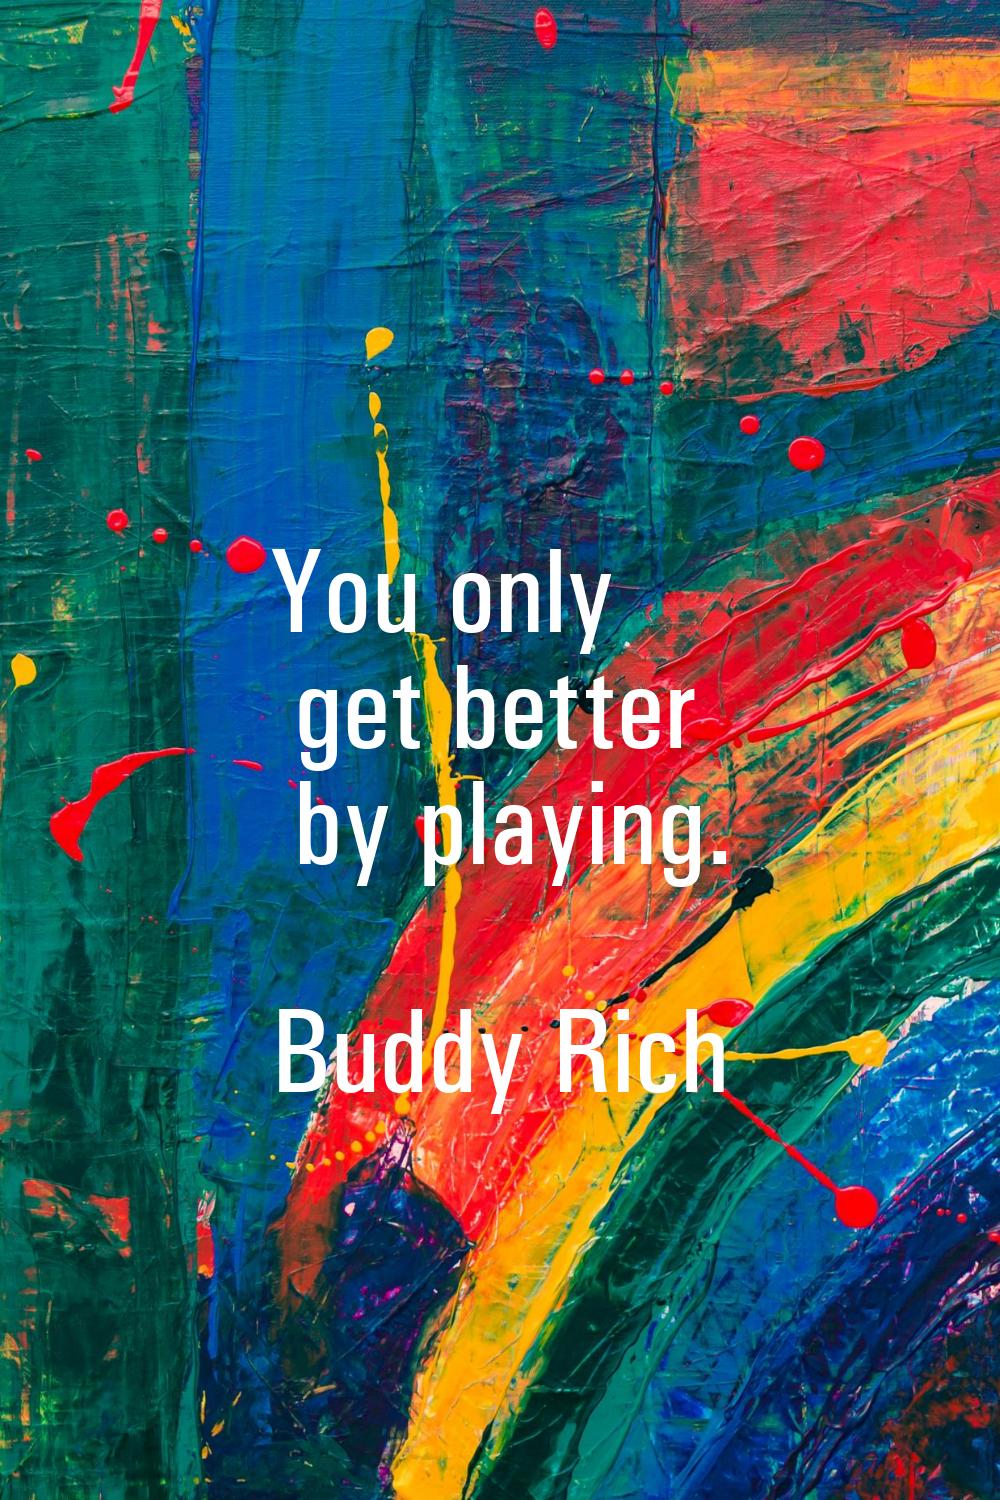 You only get better by playing.